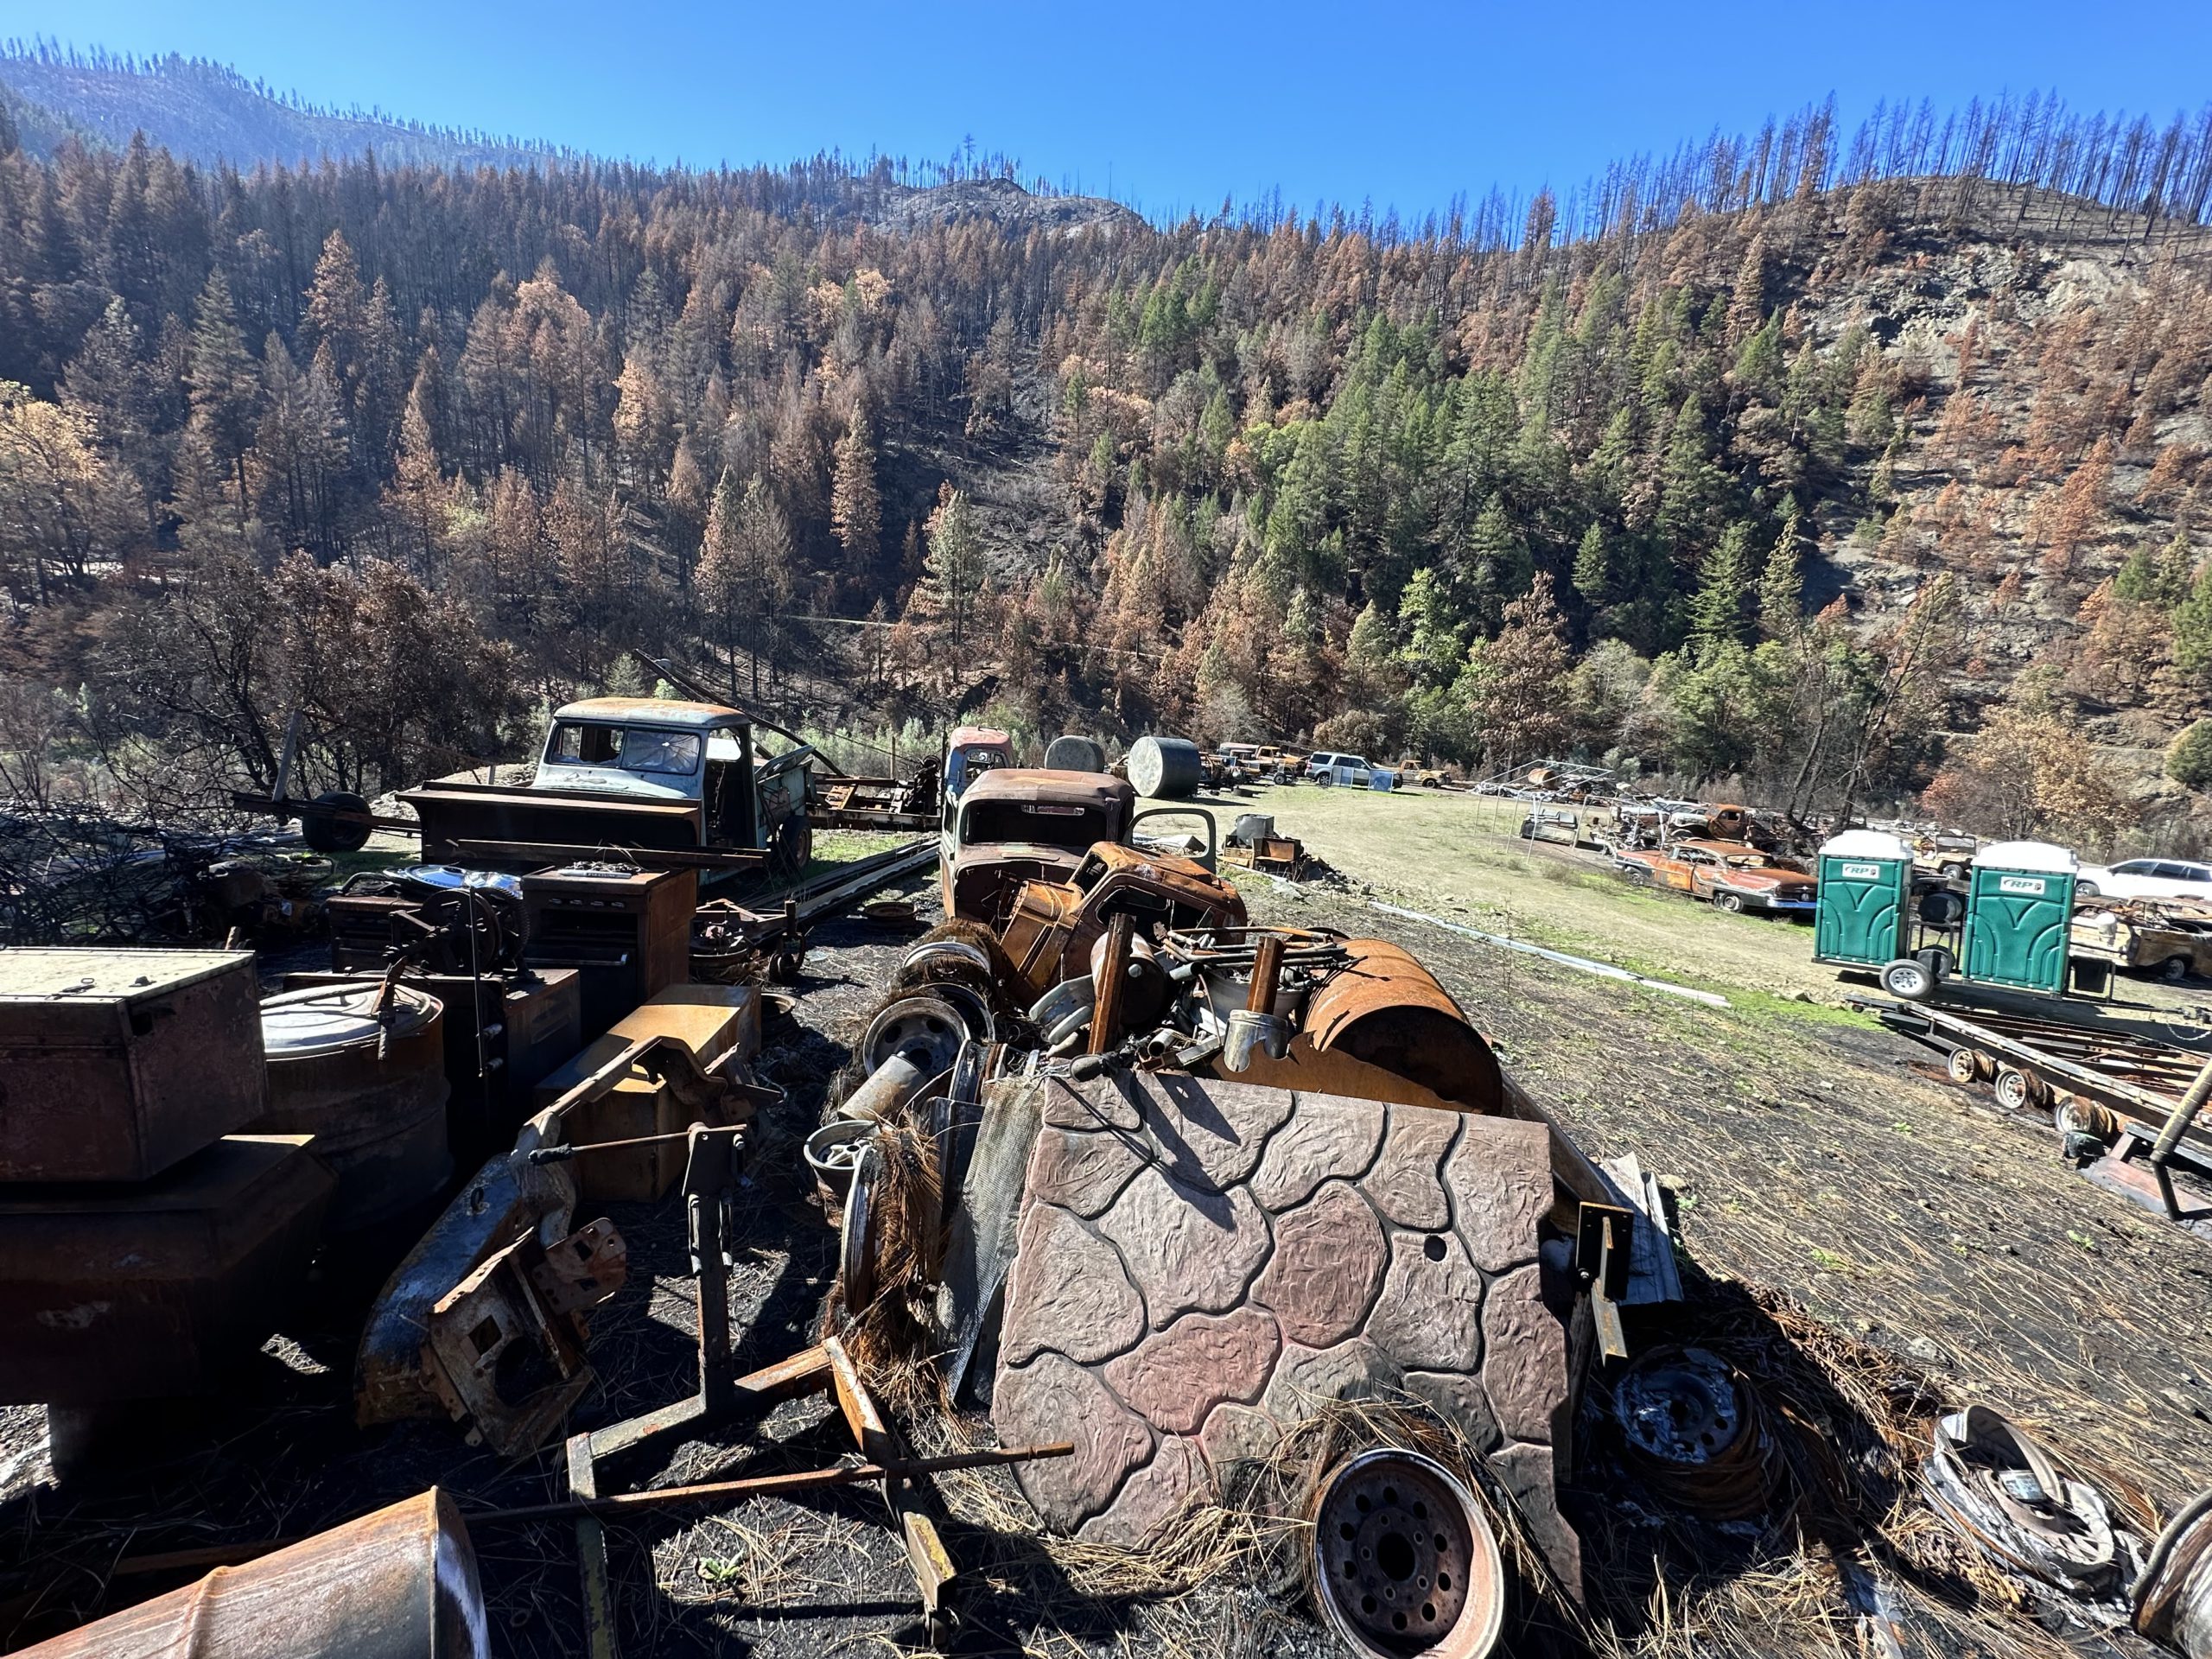 Burned items surrounded by tall pine trees in an alpine valley.